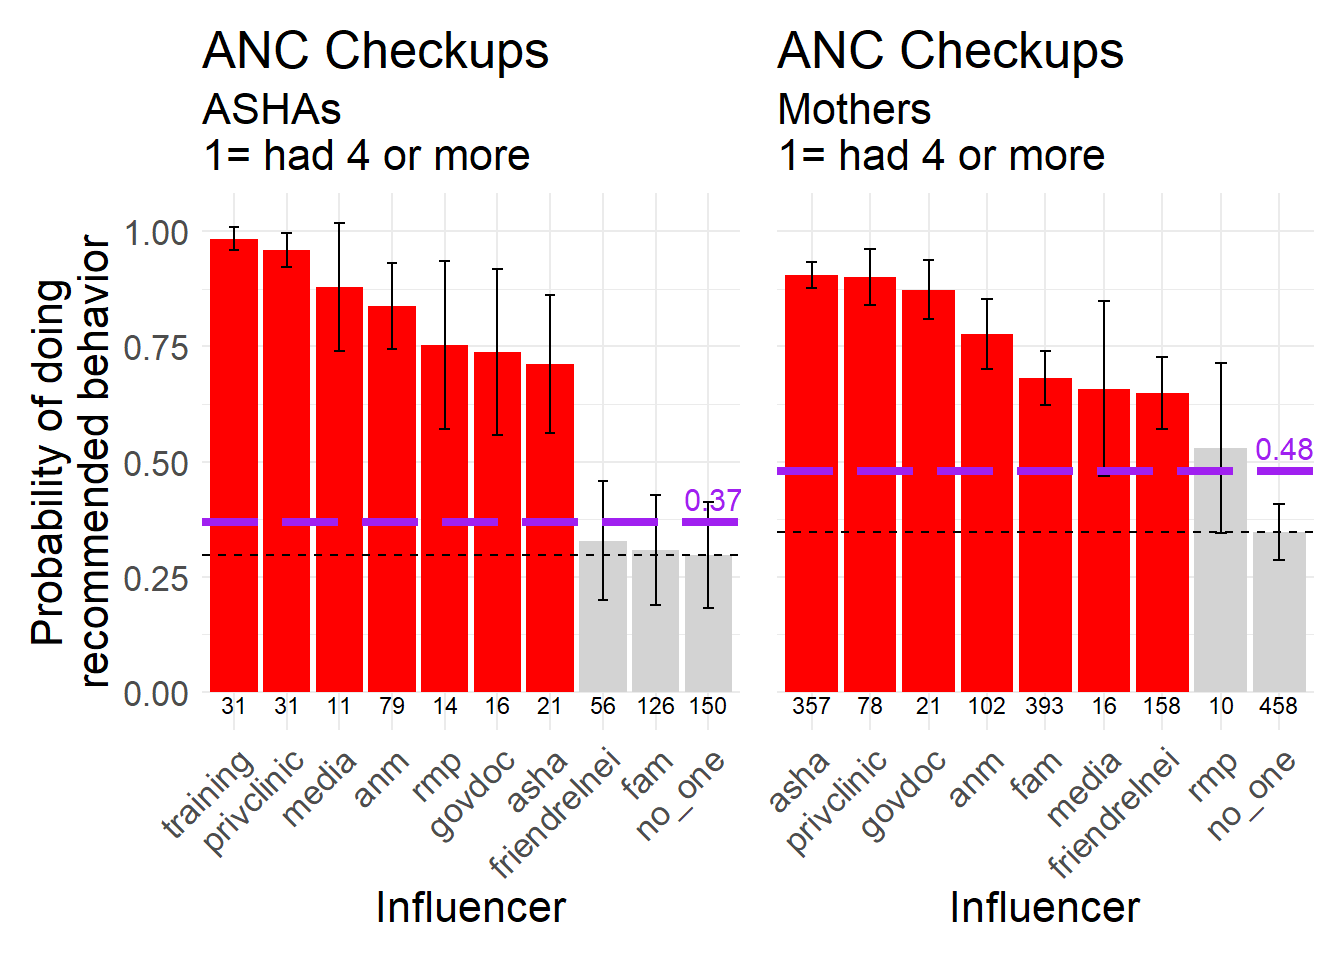 4 or more ANC checkups, a  biomedically recommended behavior, 1 = 4 or more checkups (as opposed to none to 3).